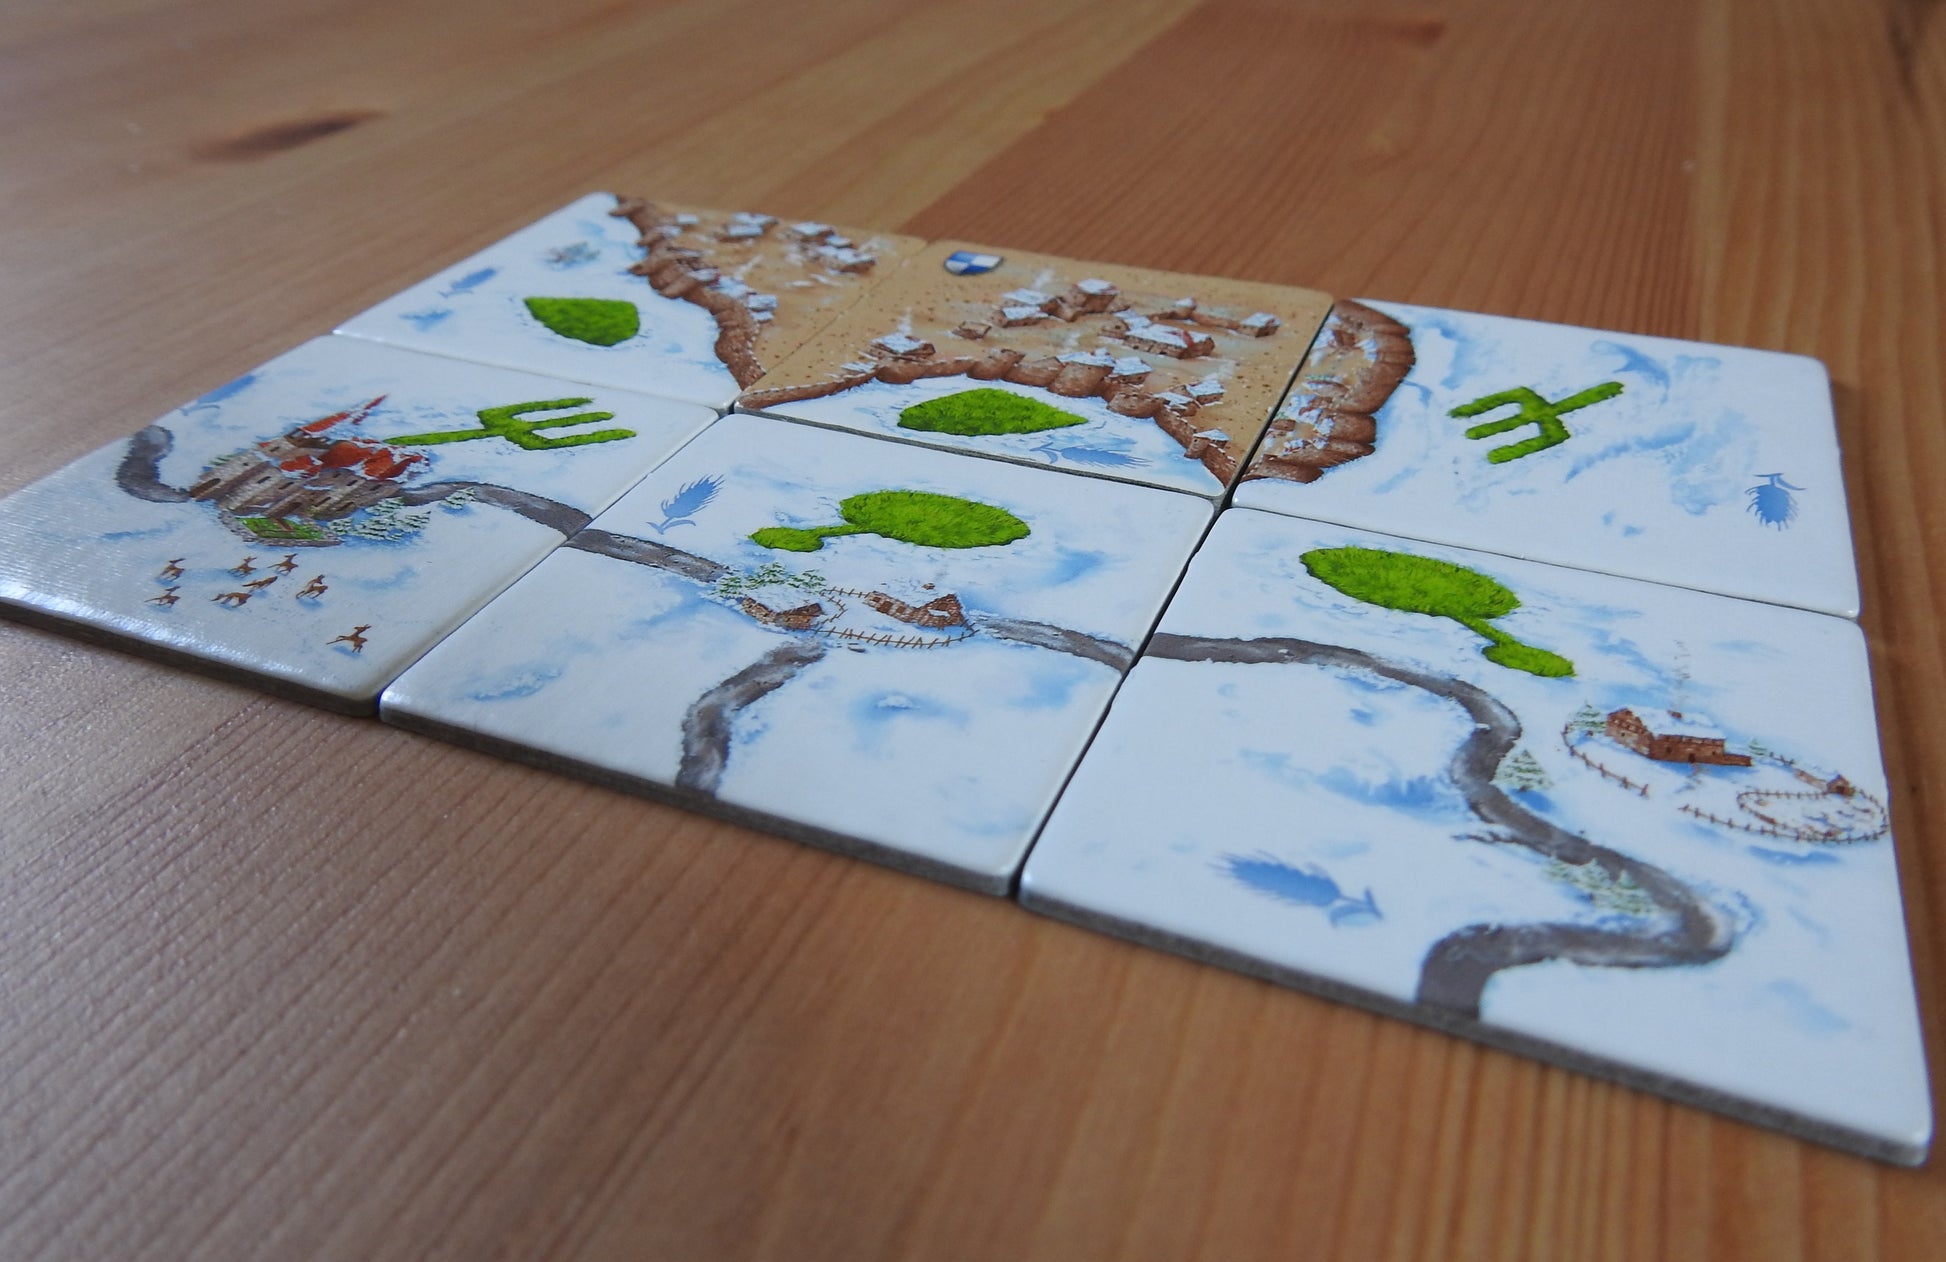 Another side view of the winter tiles - don't they look great!